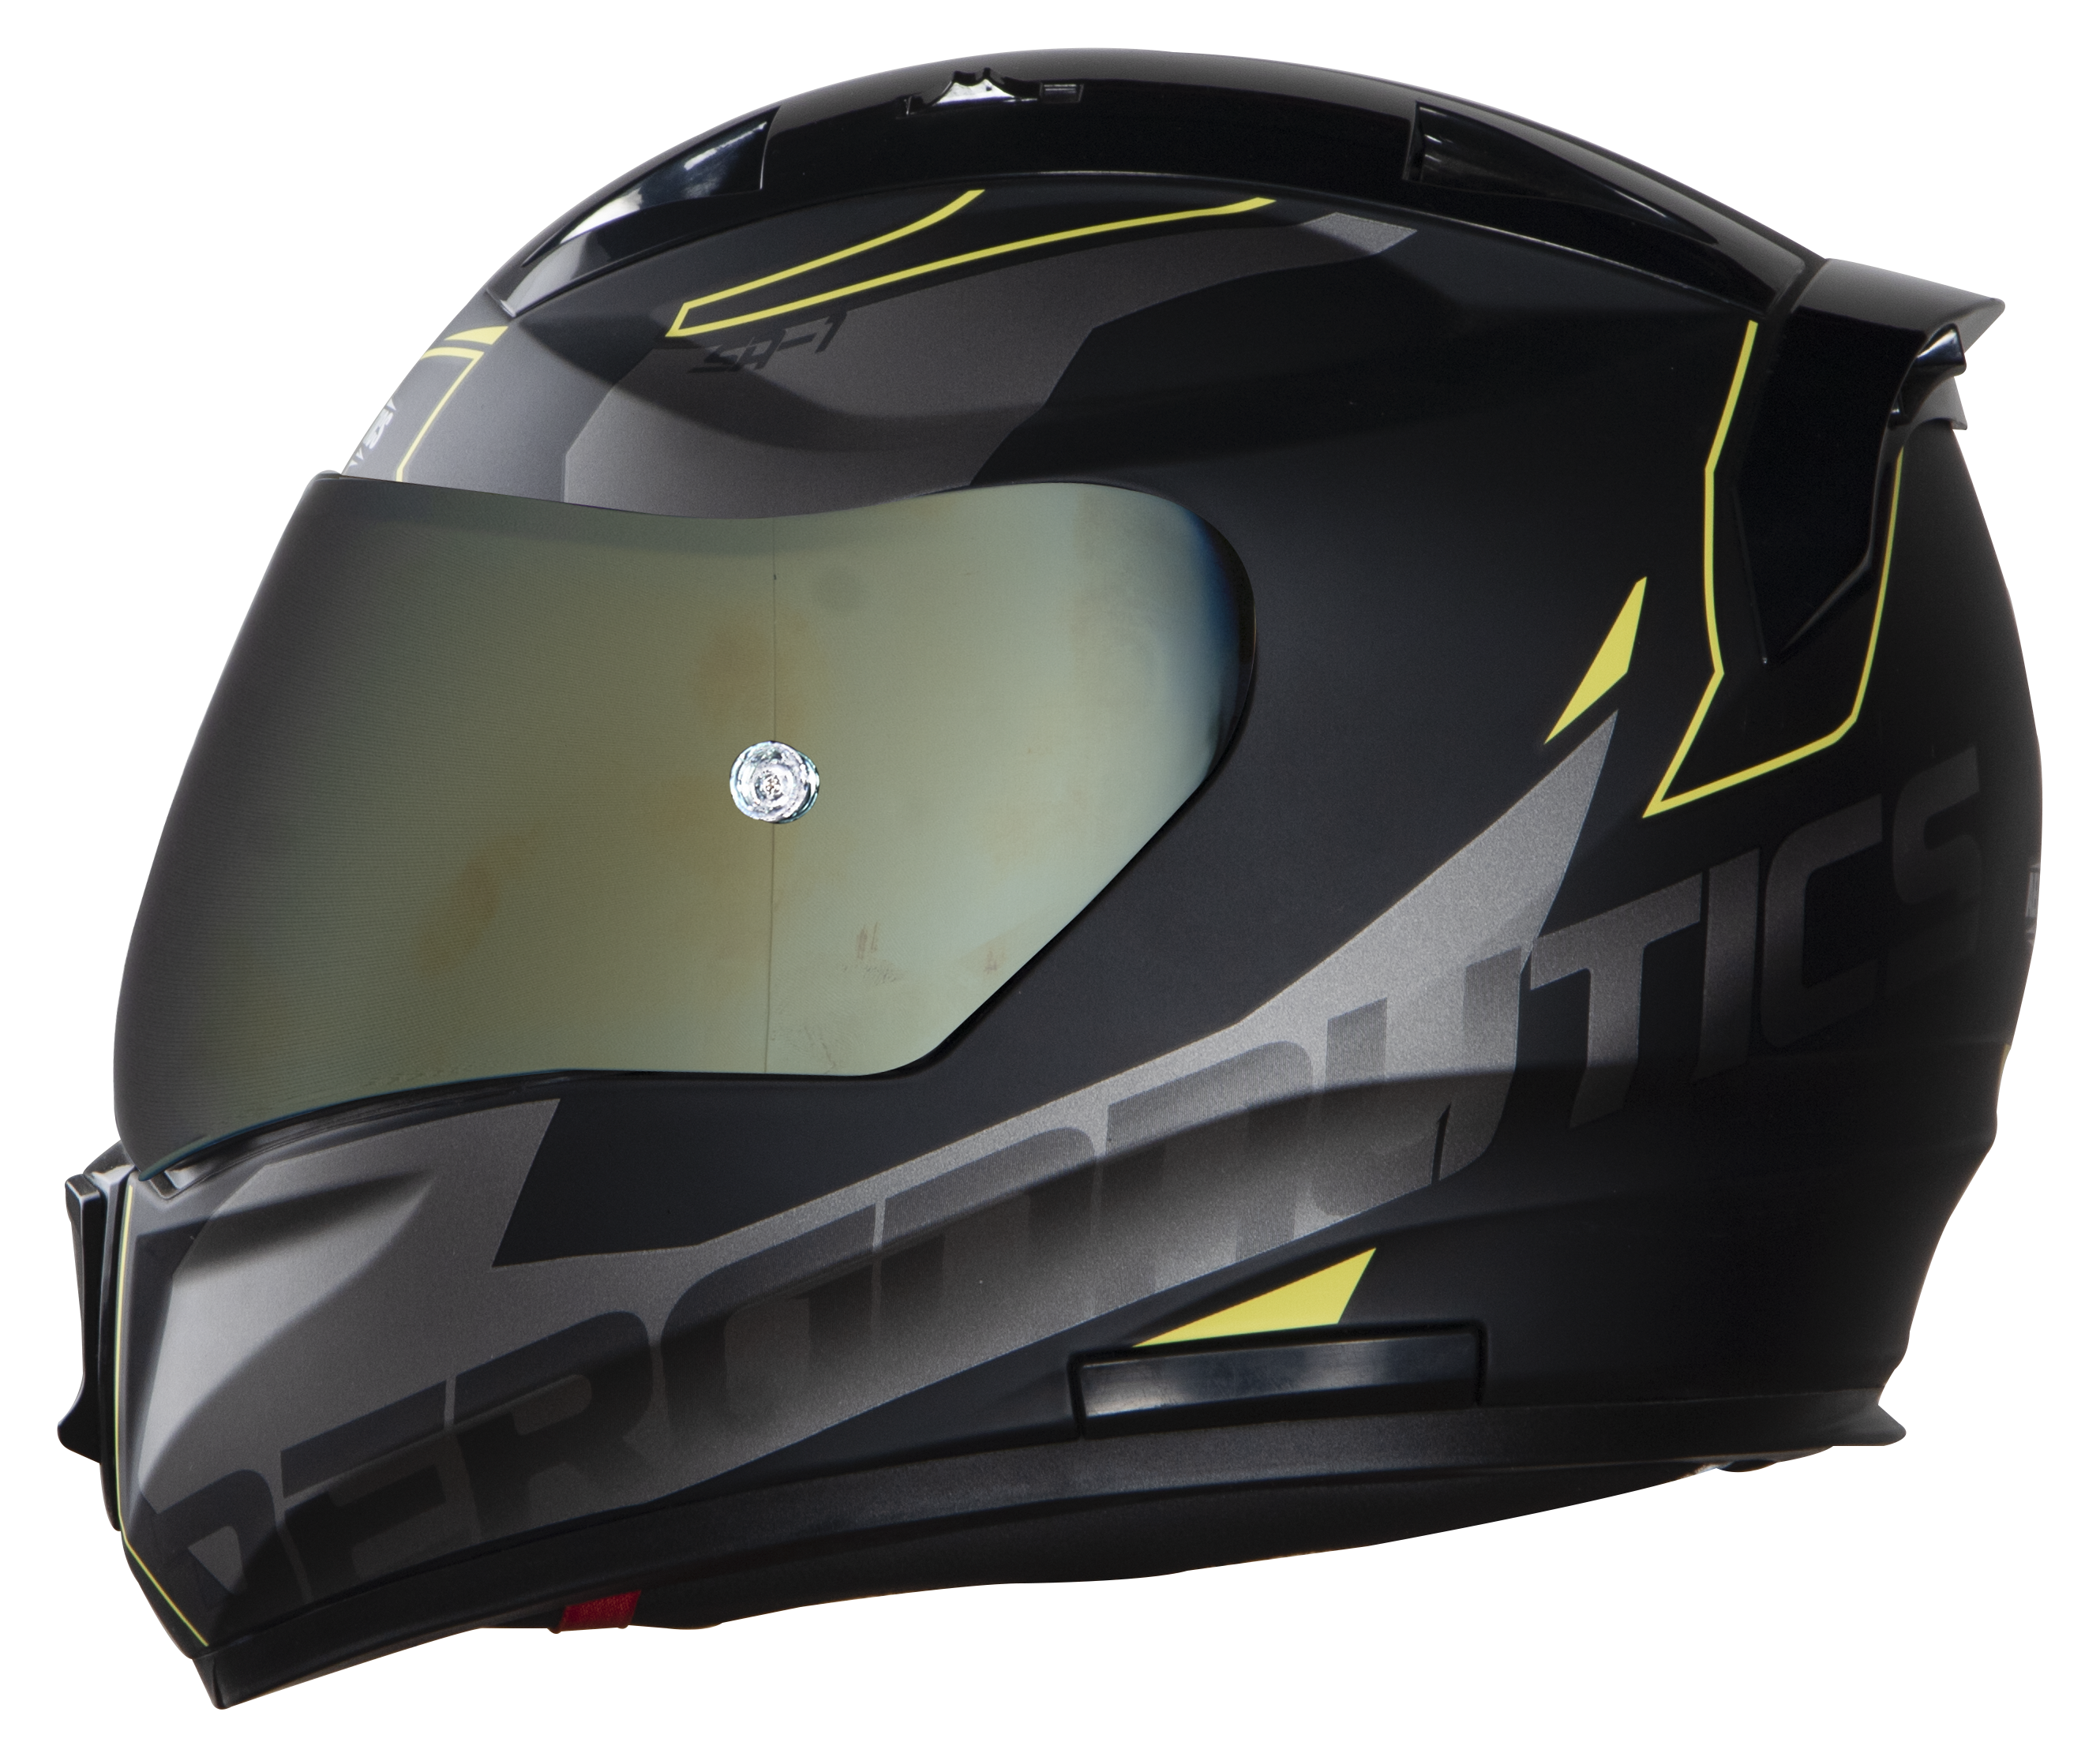 SA-1 RTW Mat Black/Yellow With Anti-Fog Shield Gold Chrome Visor(Fitted With Clear Visor Extra Gold Chrome Anti-Fog Shield Visor Free)